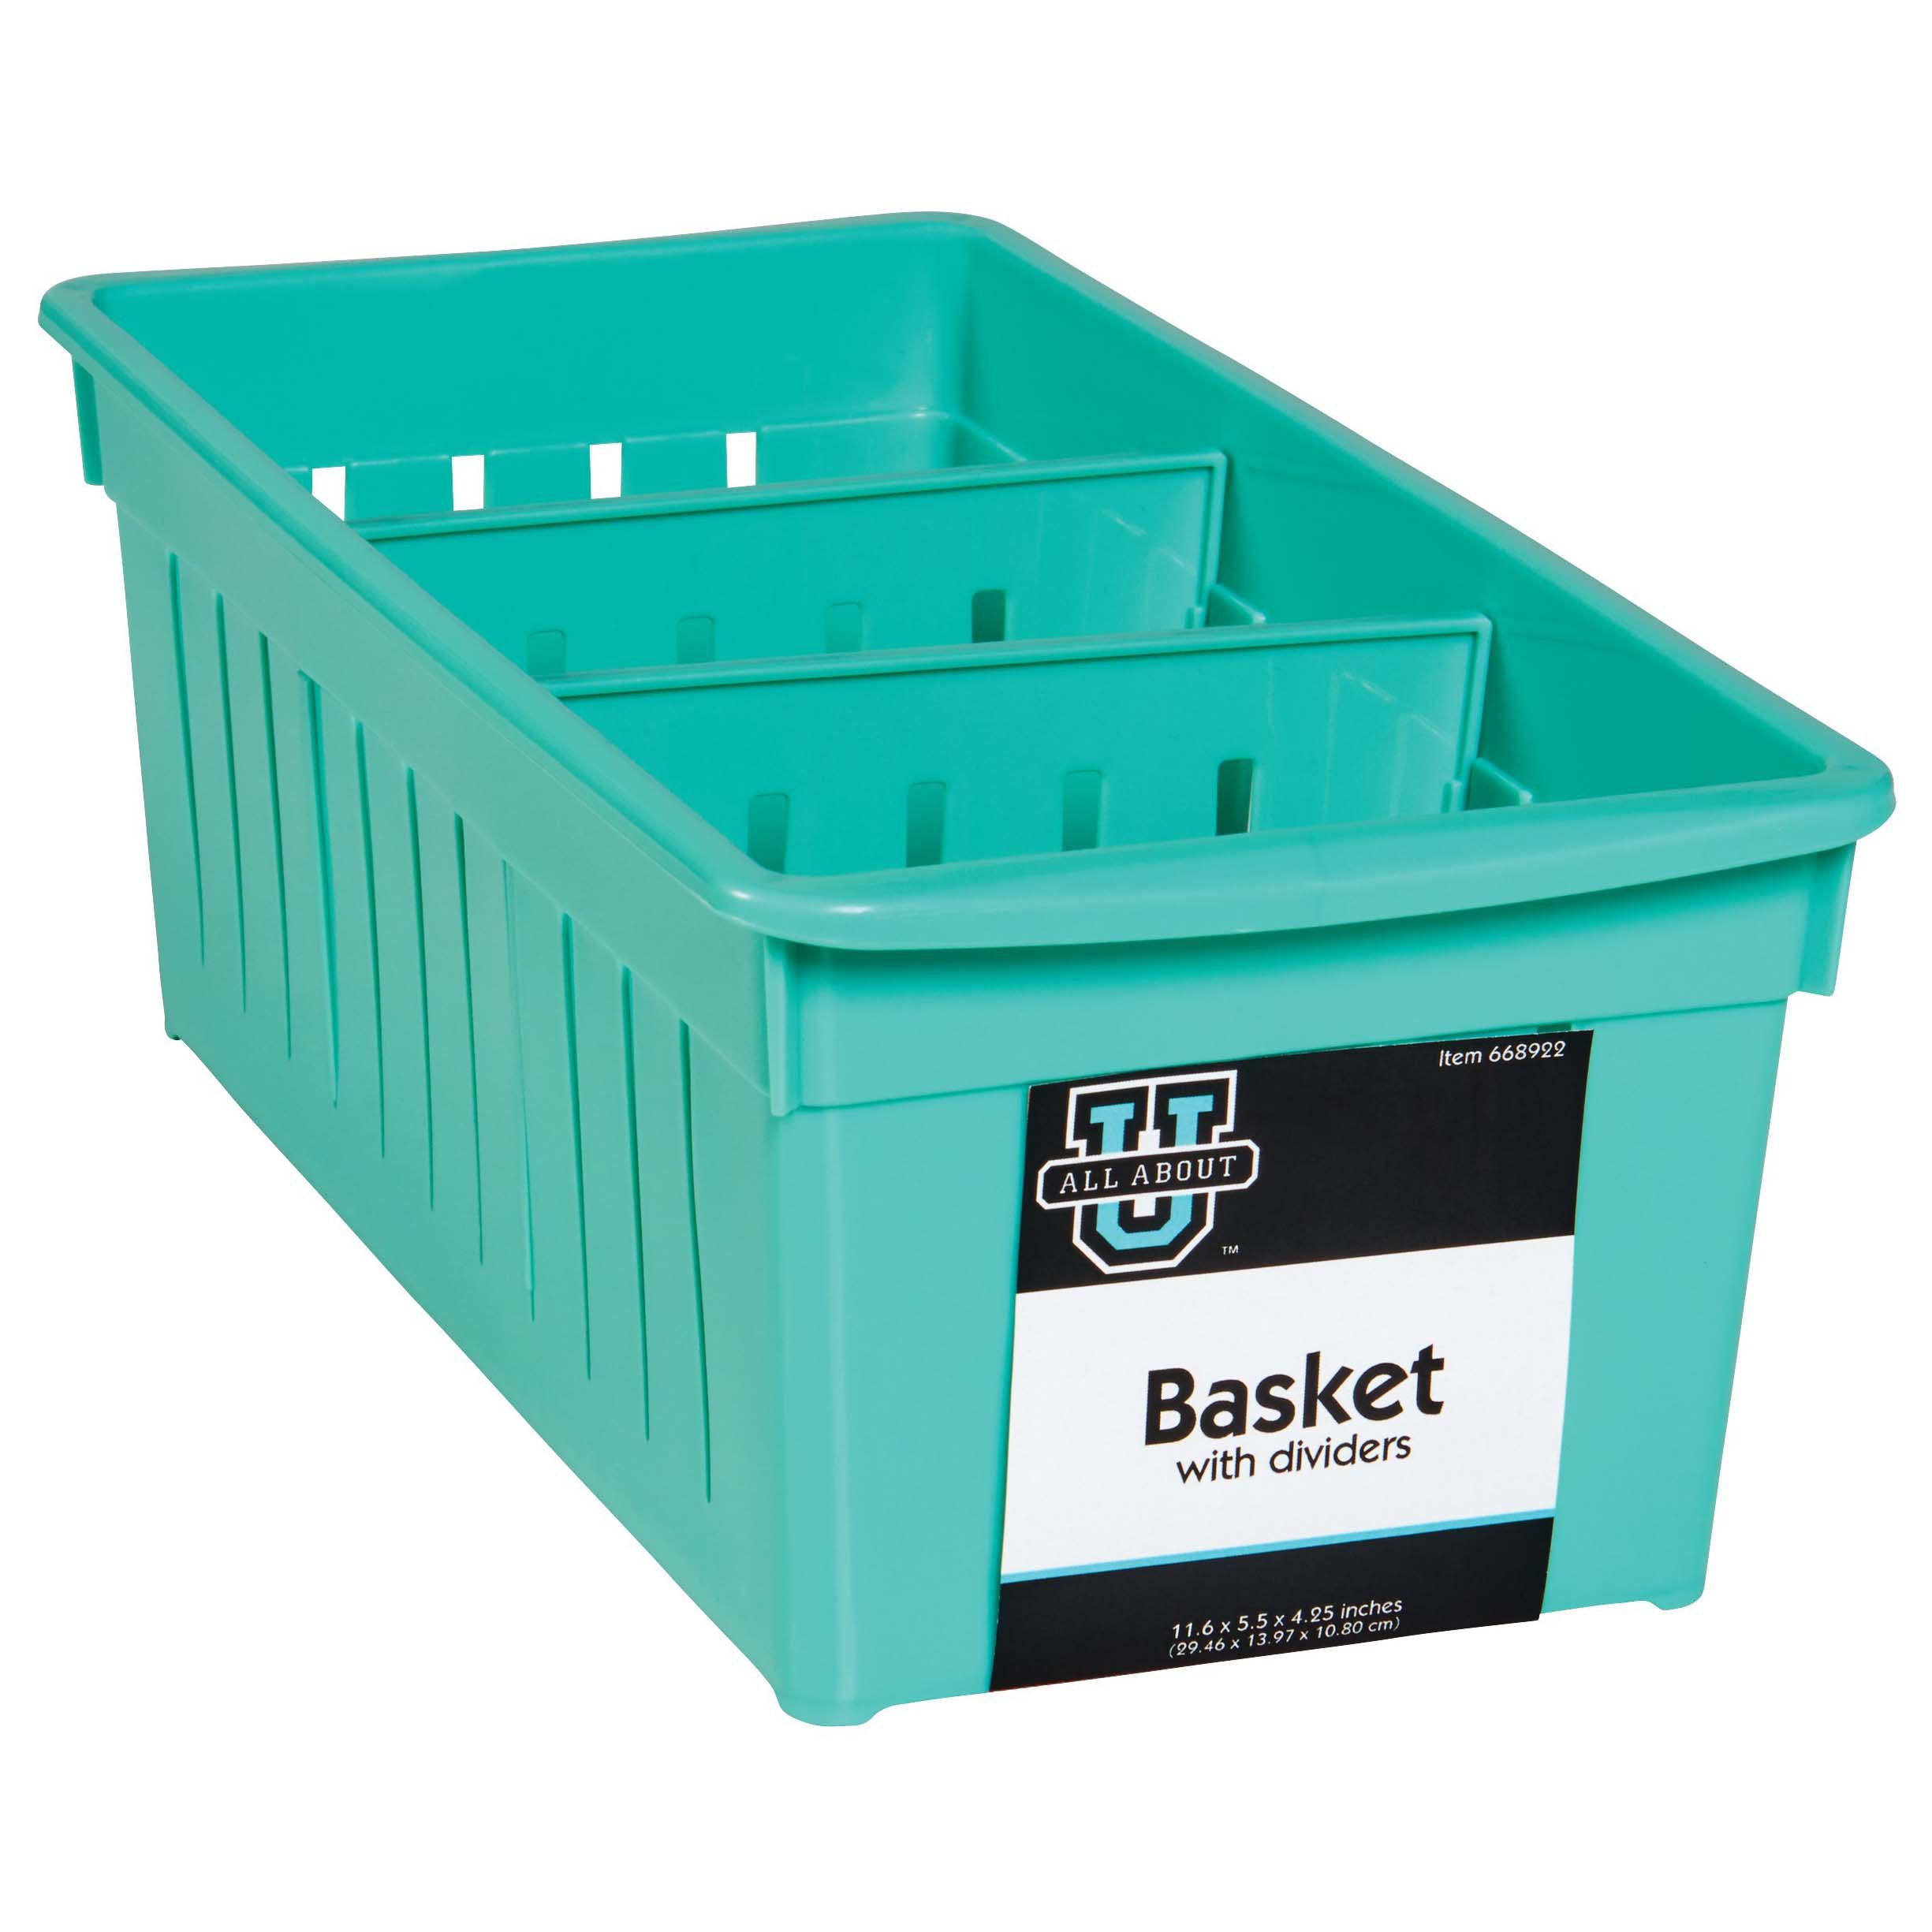 All About U Medium Basket With Dividers Mint - Shop Closet & Cabinet  Organizers at H-E-B